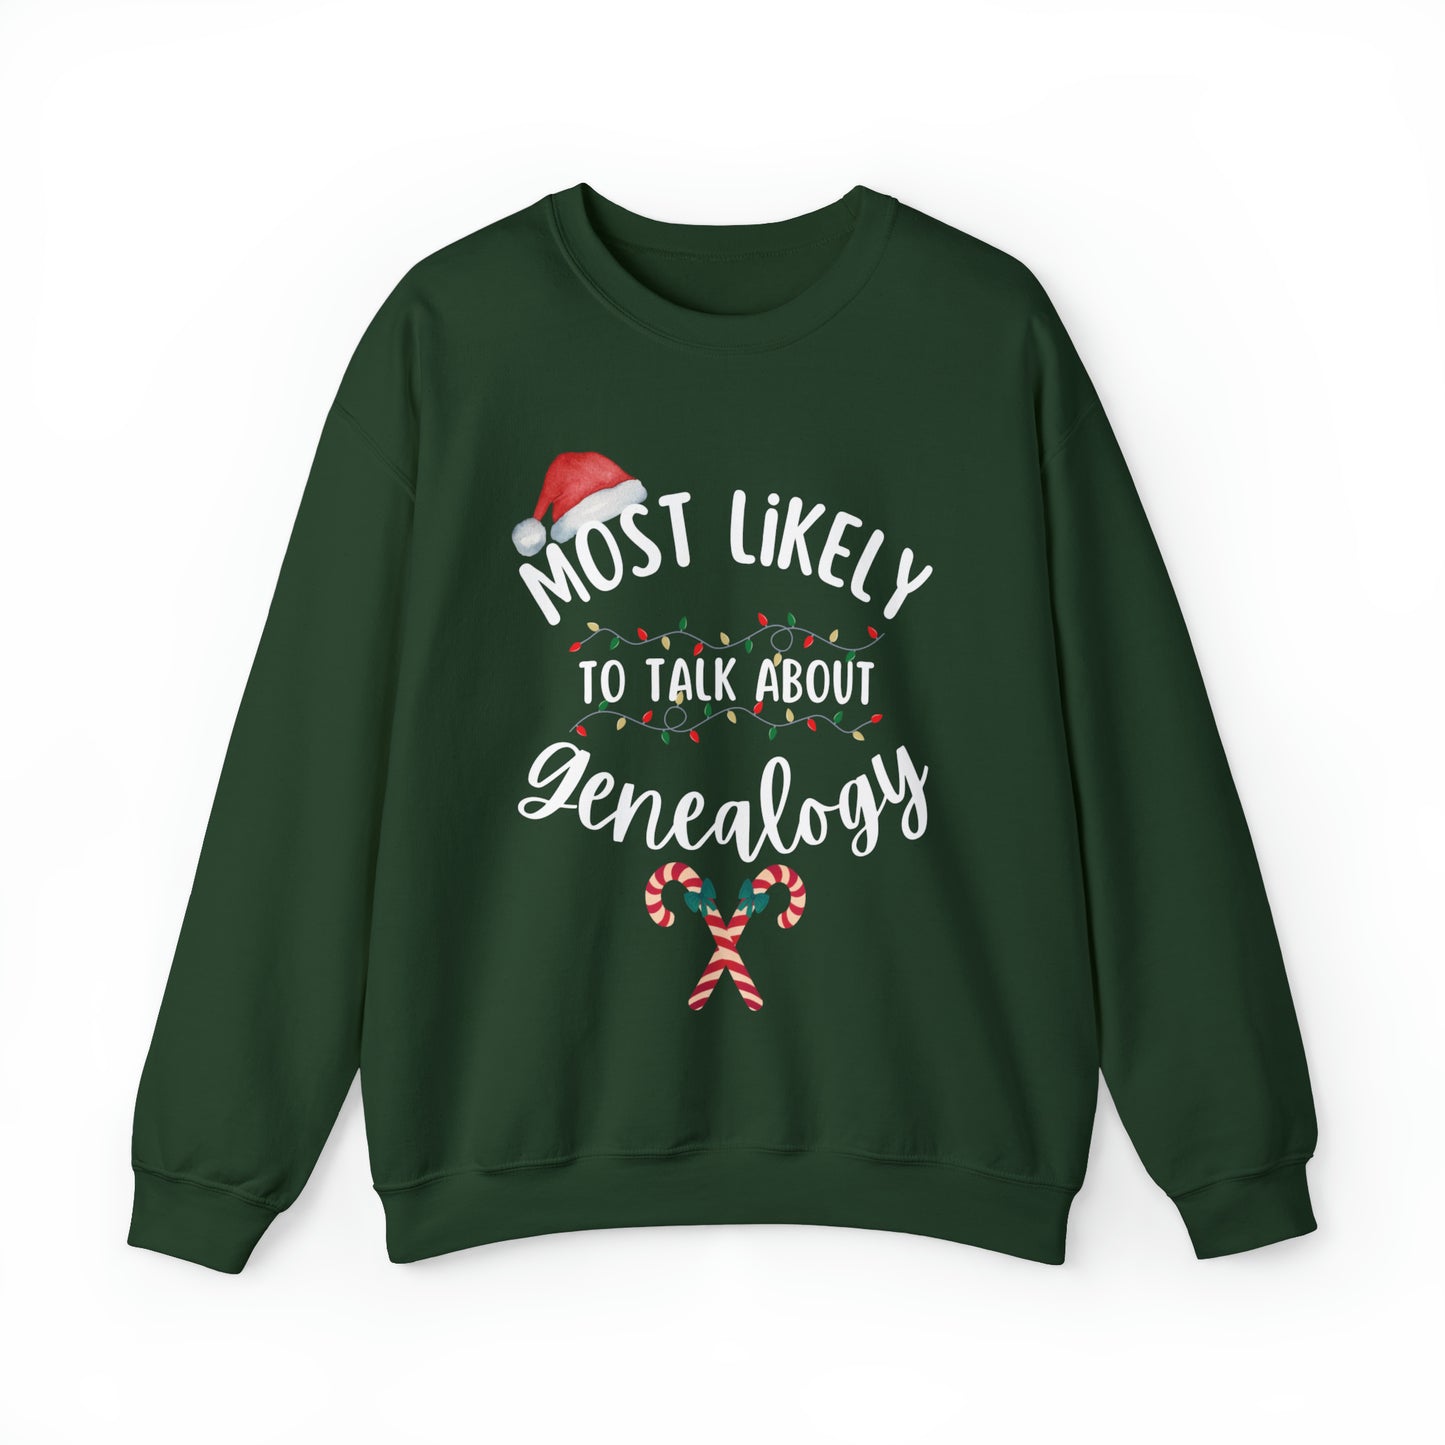 Most Likely to Talk About Genealogy Crewneck Sweatshirt